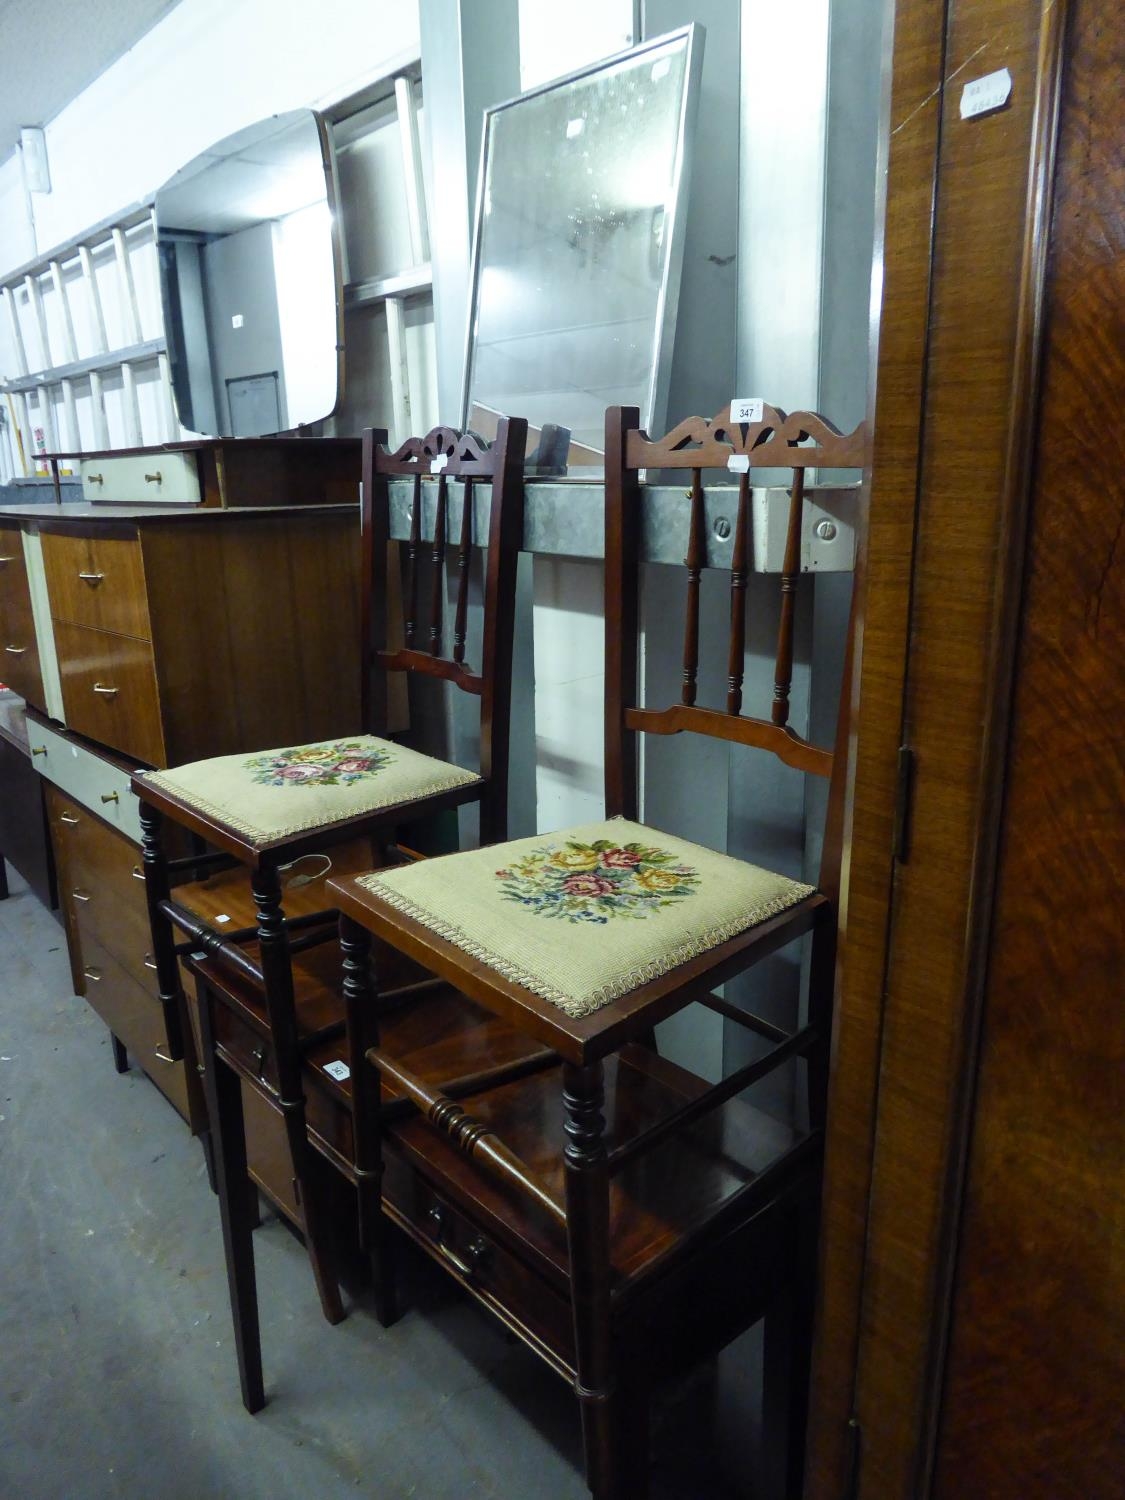 A PAIR OF MAHOGANY BEDROOM SINGLE CHAIRS WITH SPINDLE BACKS AND A CHROME FRAMED OBLONG WALL